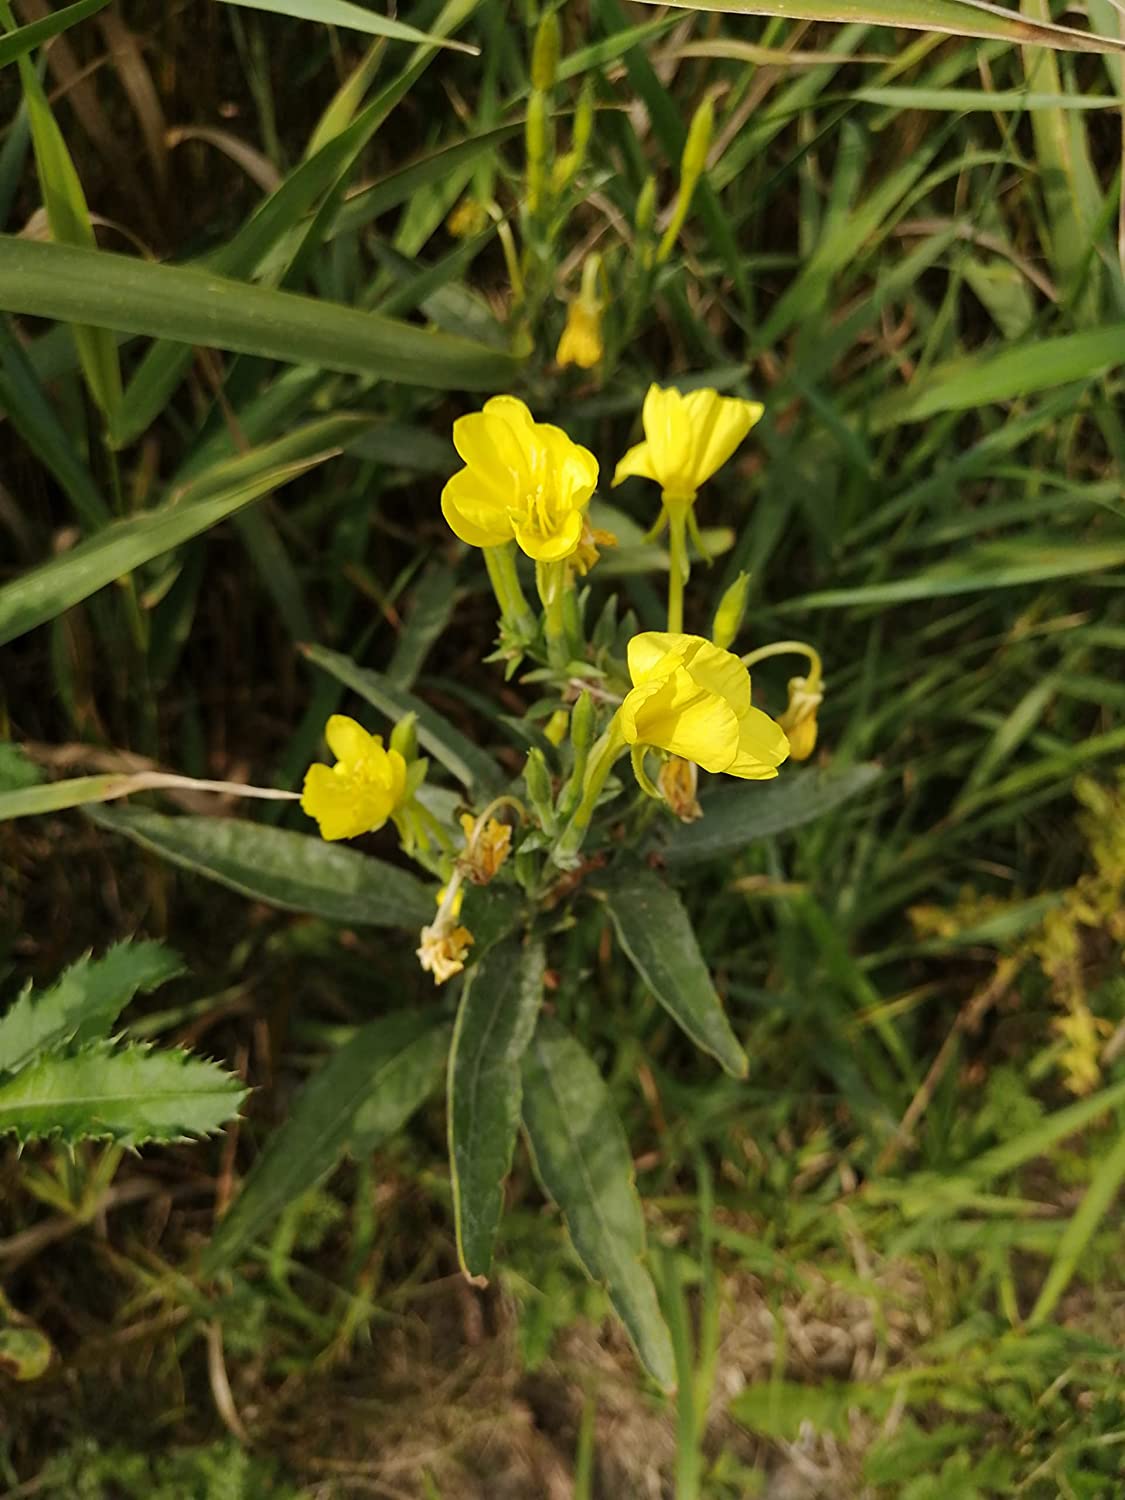 Hundredfold Common Evening Primrose 500 Seeds - Oenothera biennis King's Cure-All Sundrop Canada Native Flower Wildflower